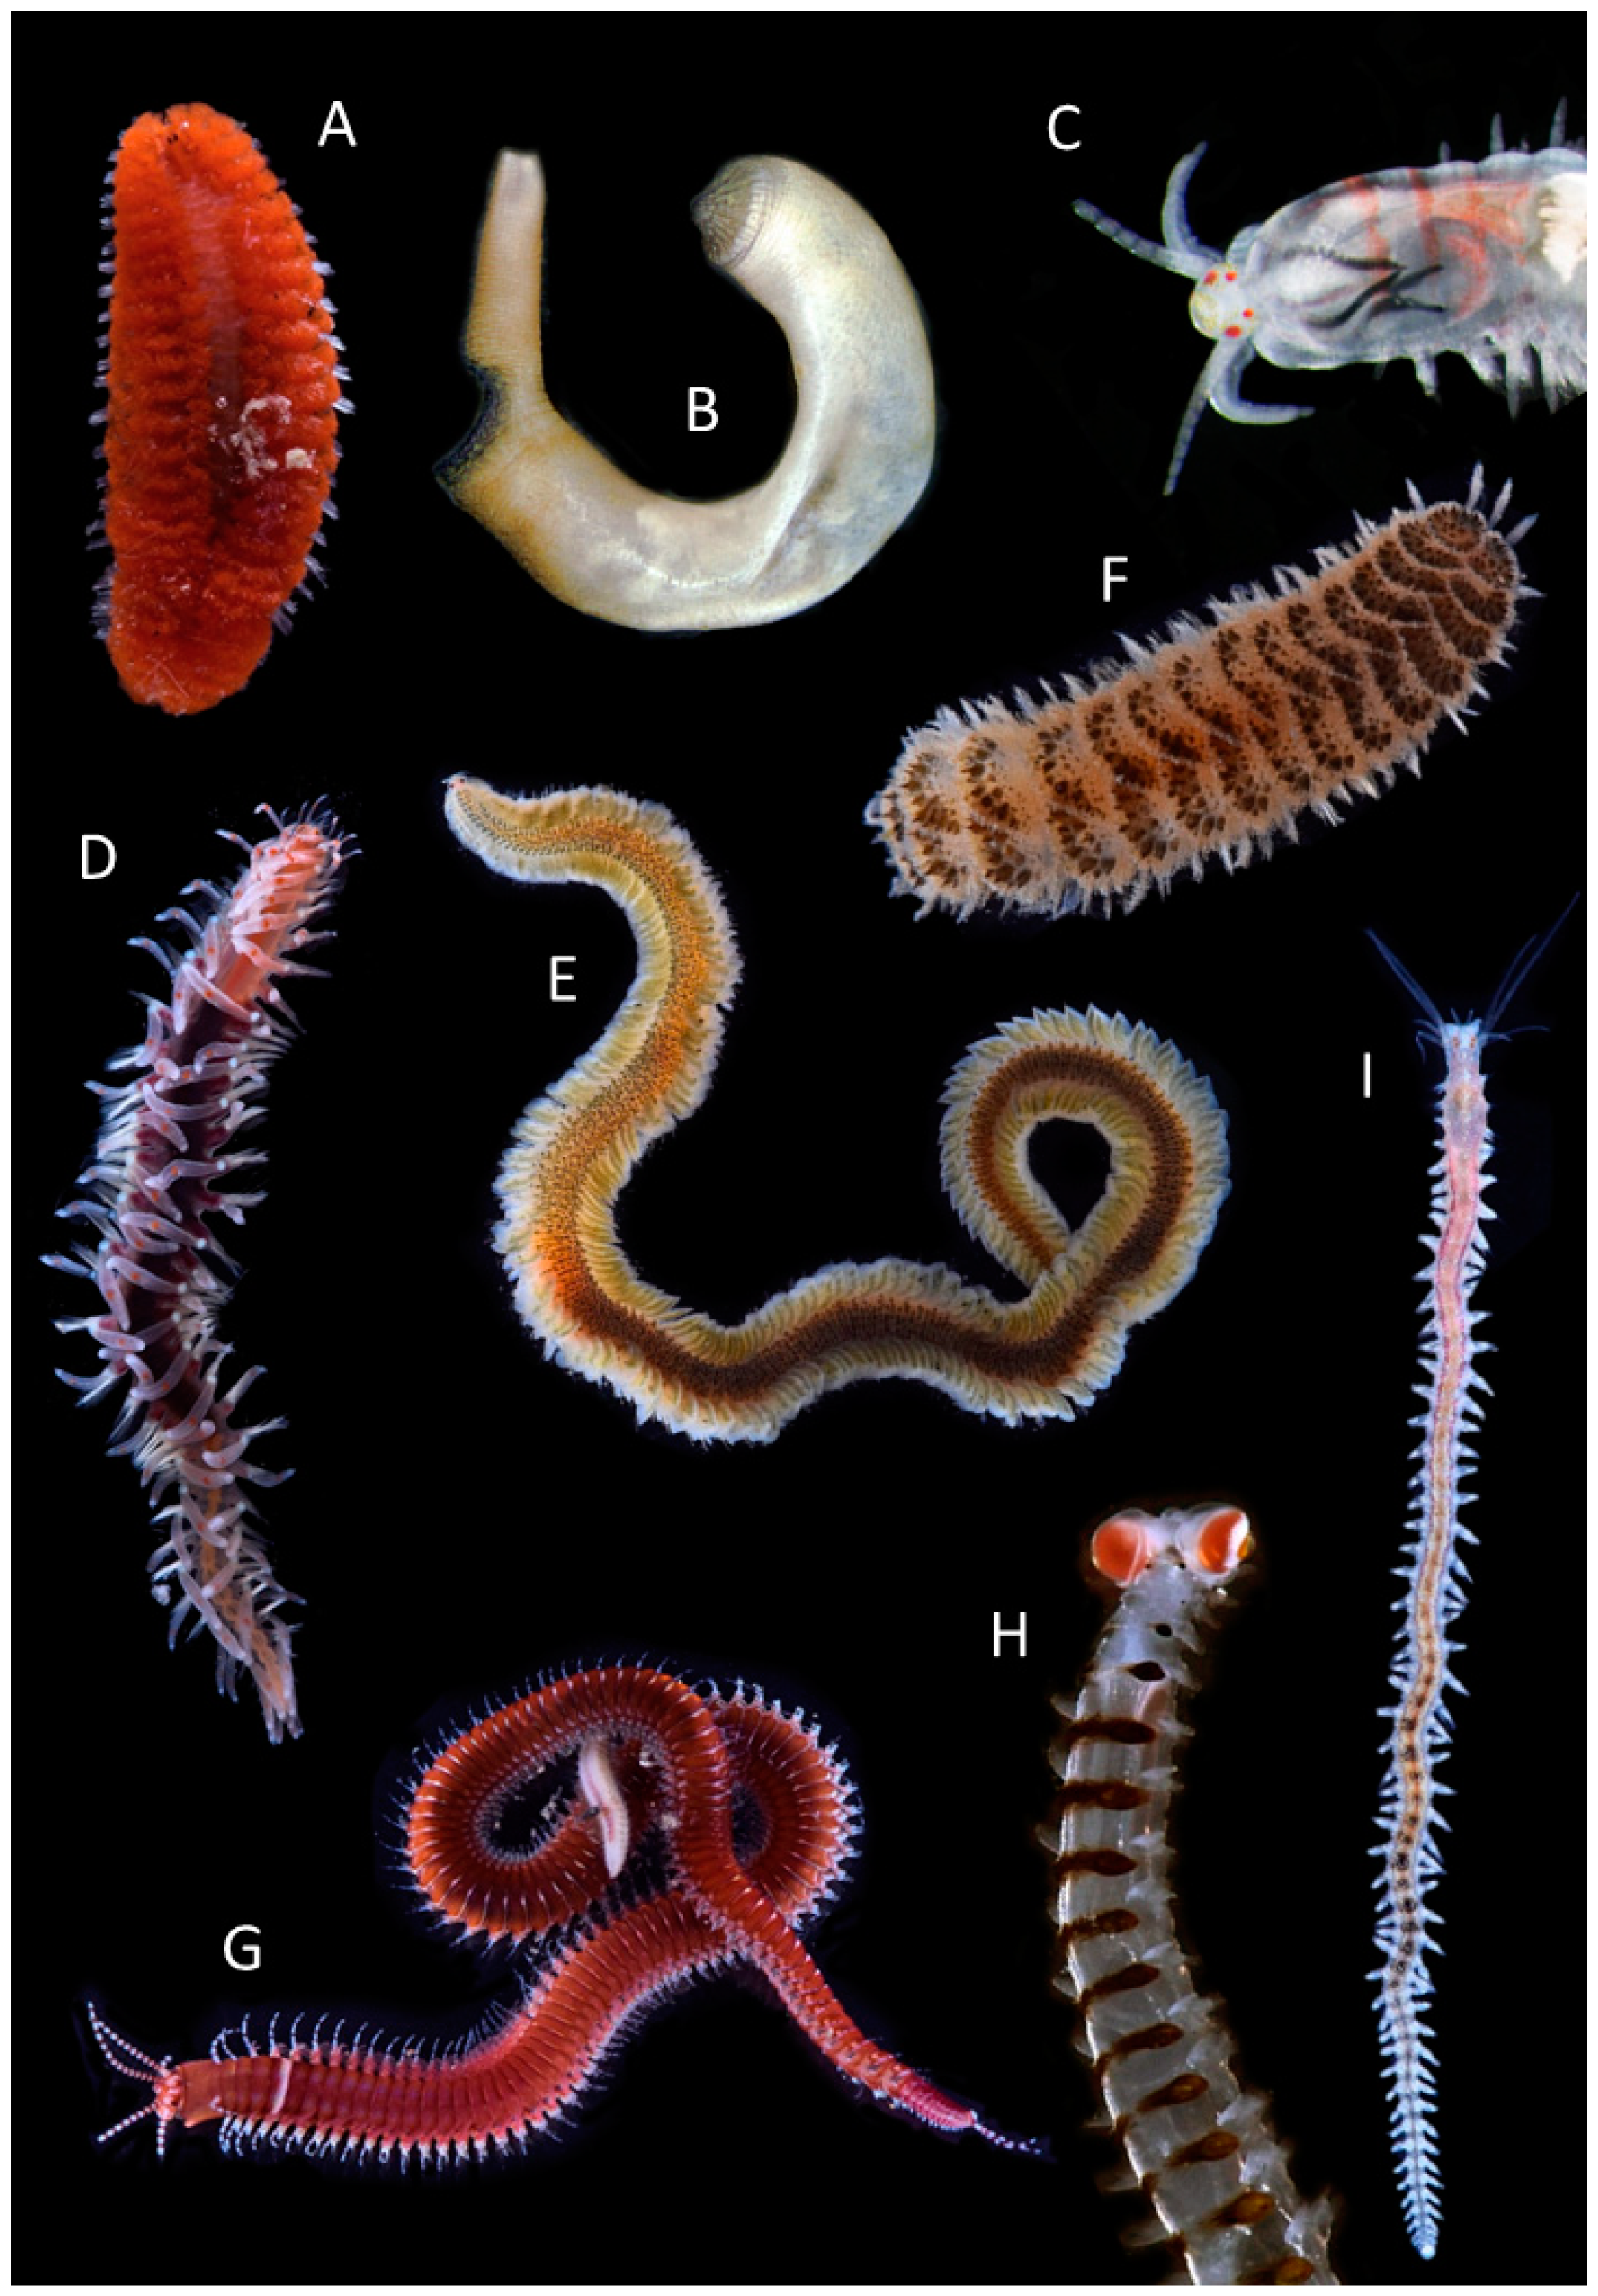 annelids examples